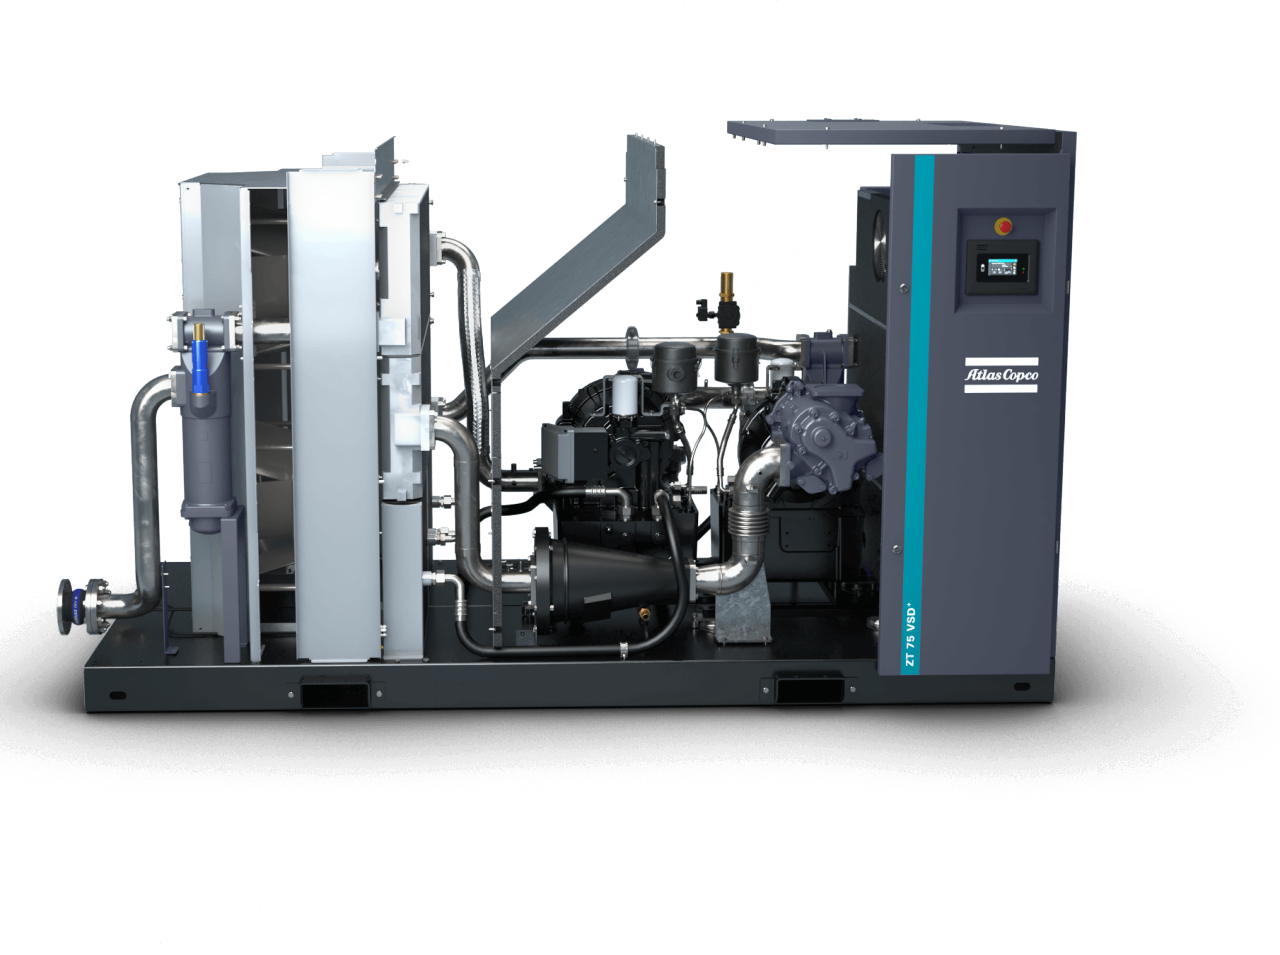 ZT 75 VSD+ Premium air-cooled oil-free rotary screw compressor internal components